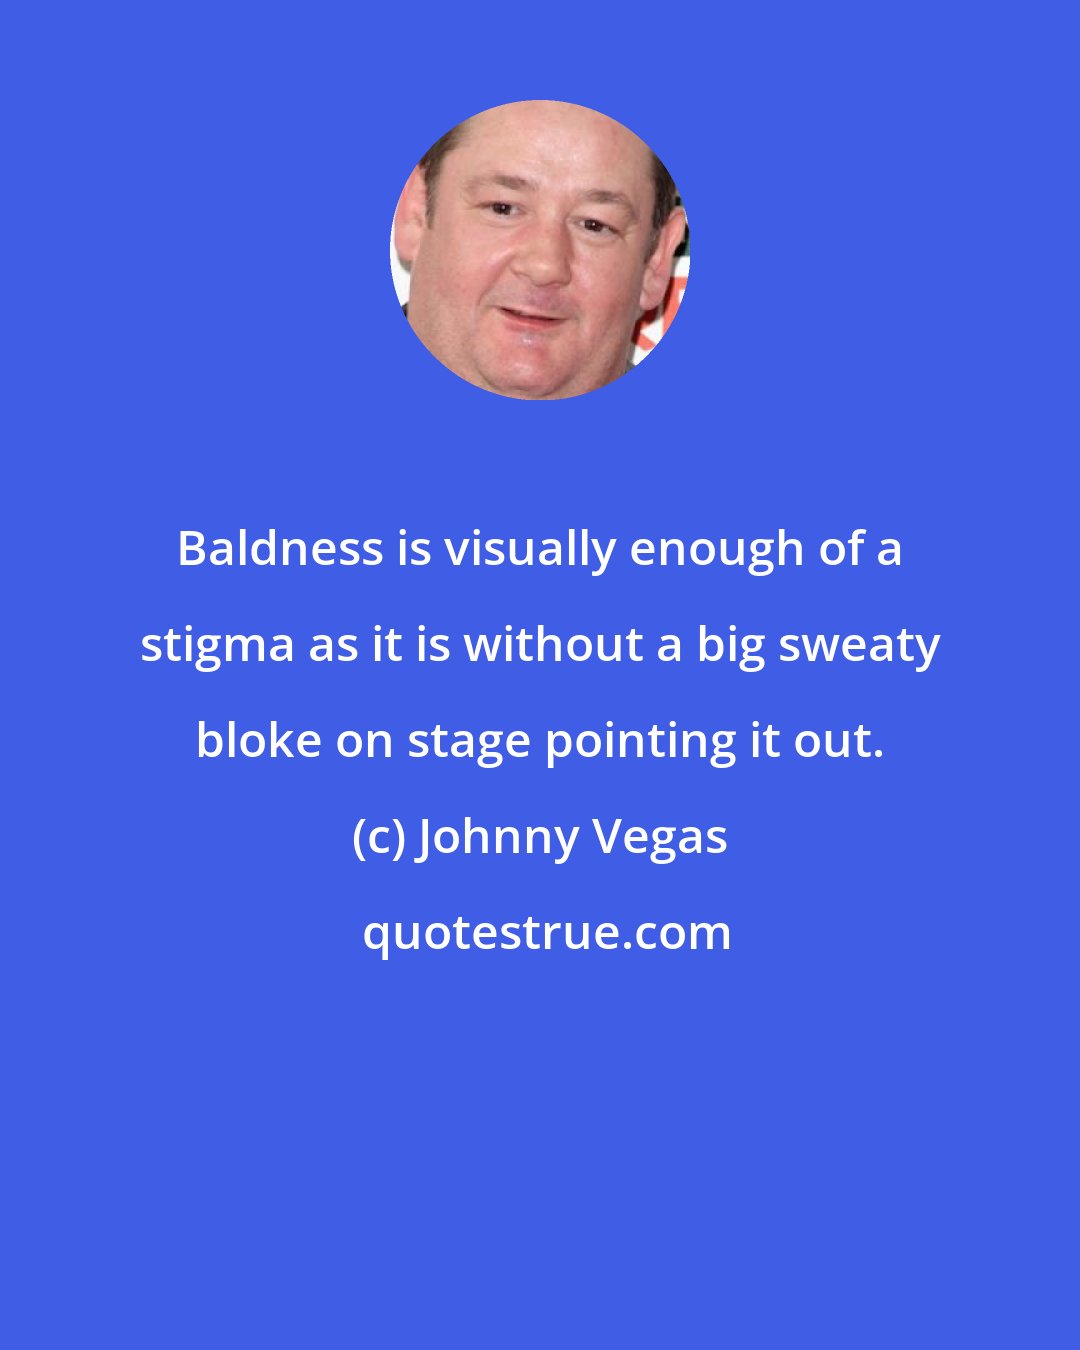 Johnny Vegas: Baldness is visually enough of a stigma as it is without a big sweaty bloke on stage pointing it out.